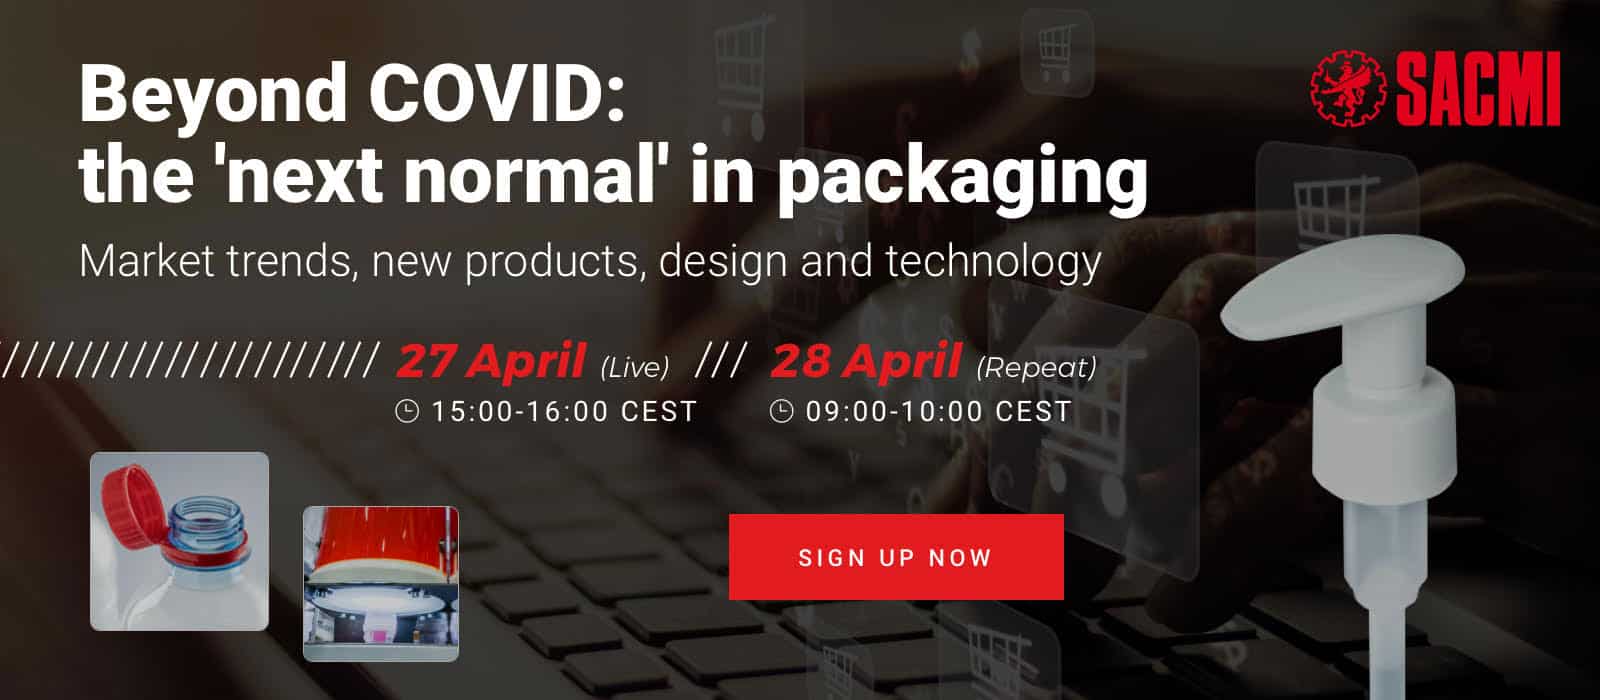 SACMI Webinar on "Beyond COVID - The Next Normal in Packaging" 27 April 2021